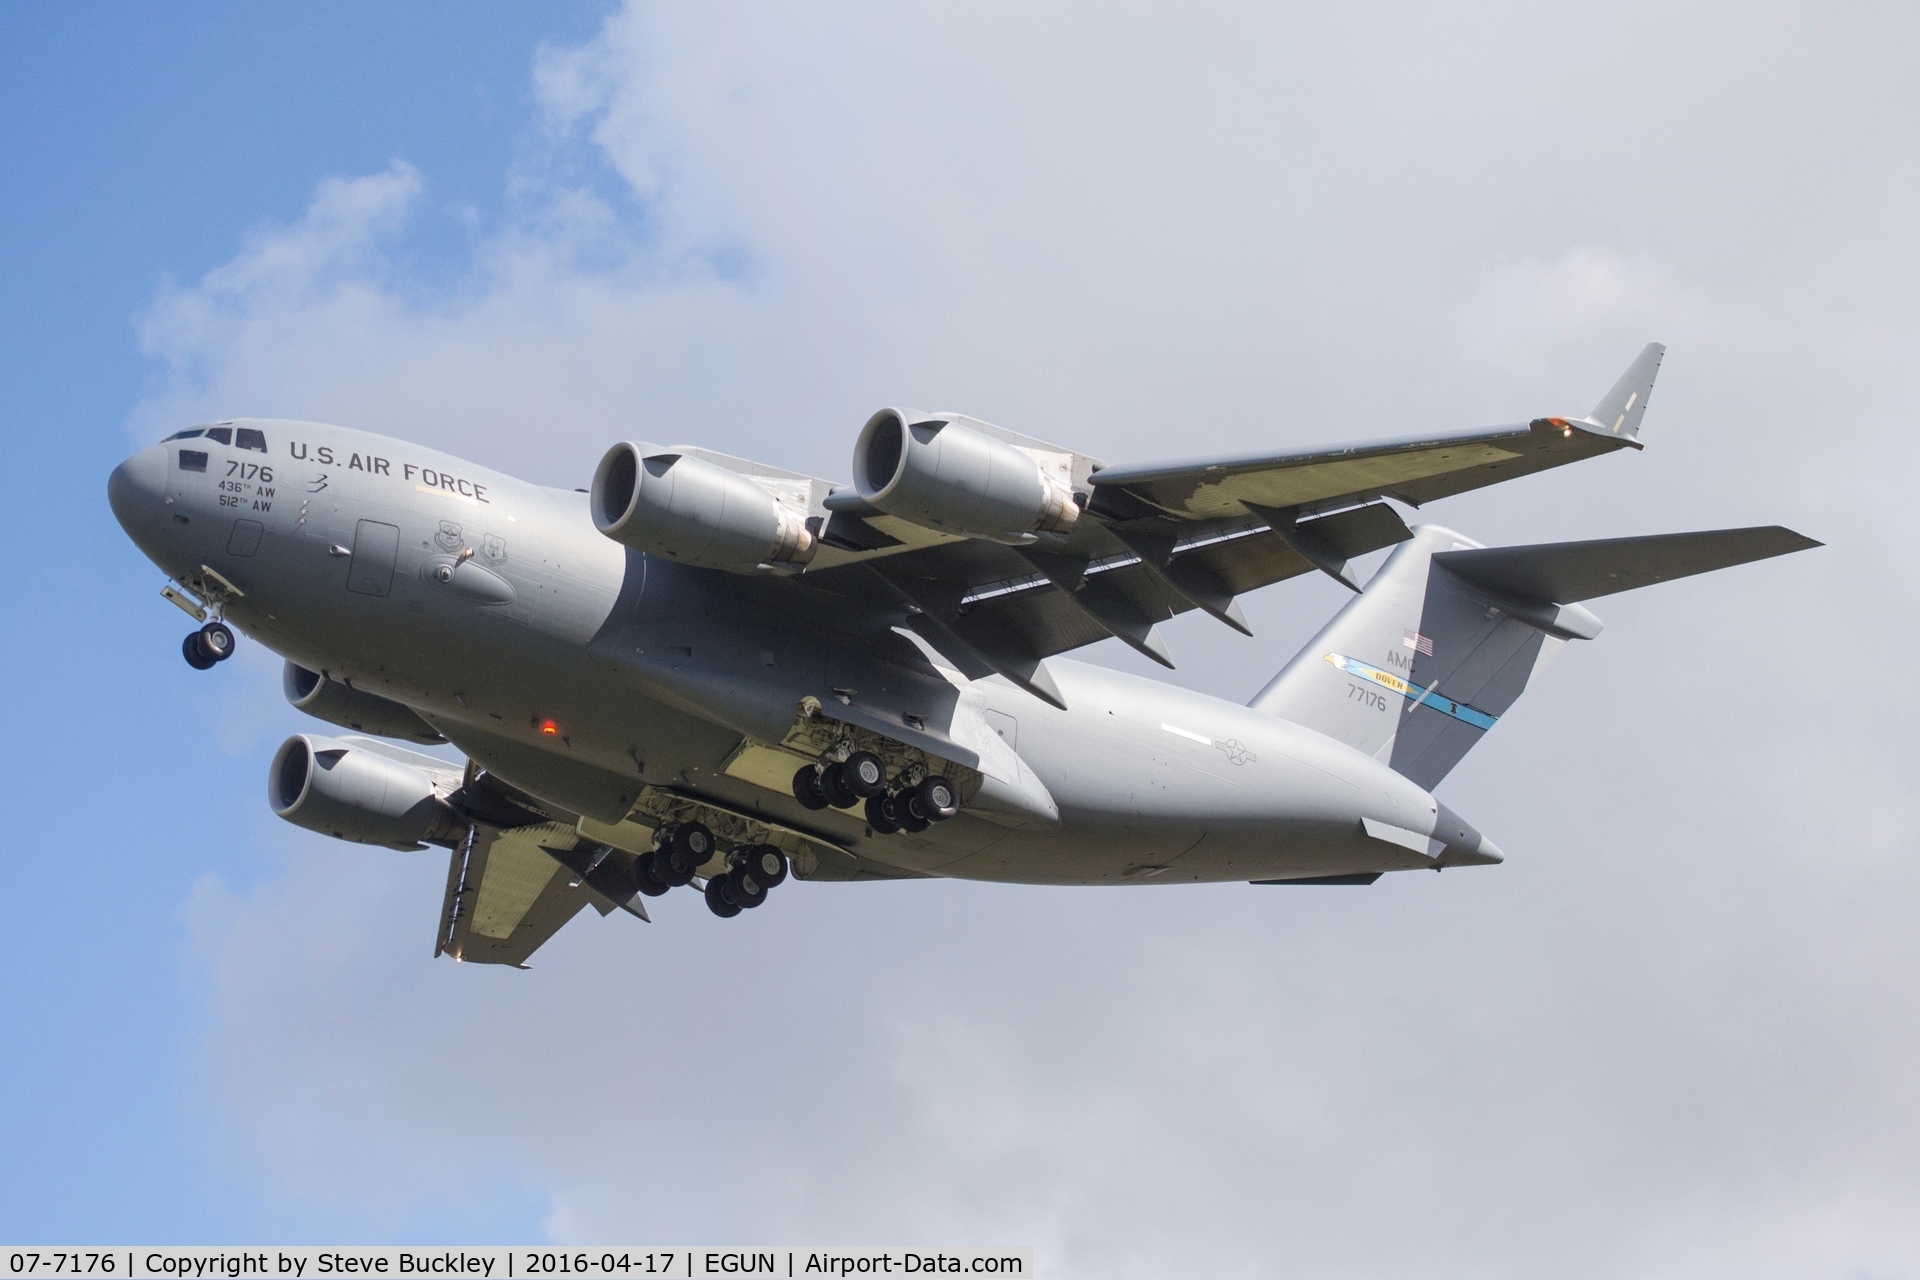 07-7176, 2007 Boeing C-17A Globemaster III C/N P-176, Boeing C-17A 07-7176 of the 436th AW based at Dover AFB arrives at Mildenhall as RCH136